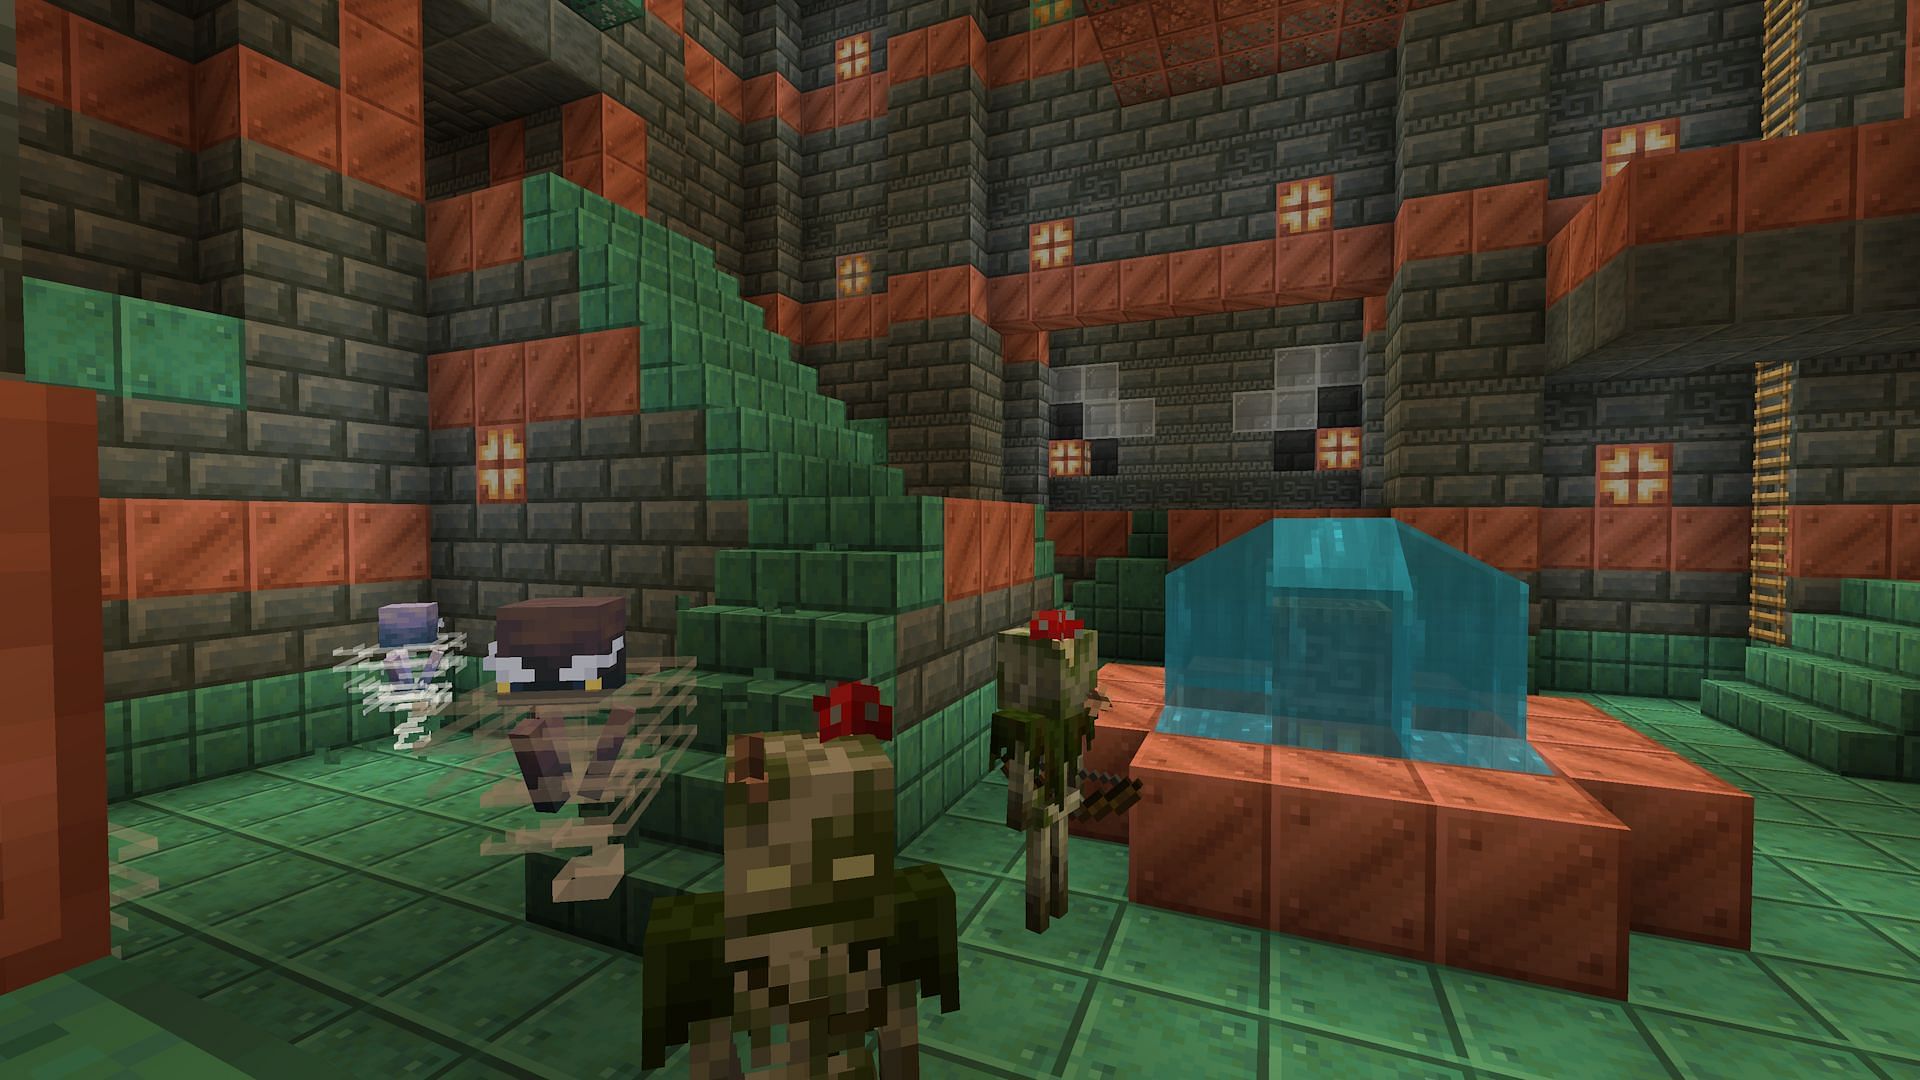 Breeze and bogged in the main room of a trial chamber (Image via Mojang)